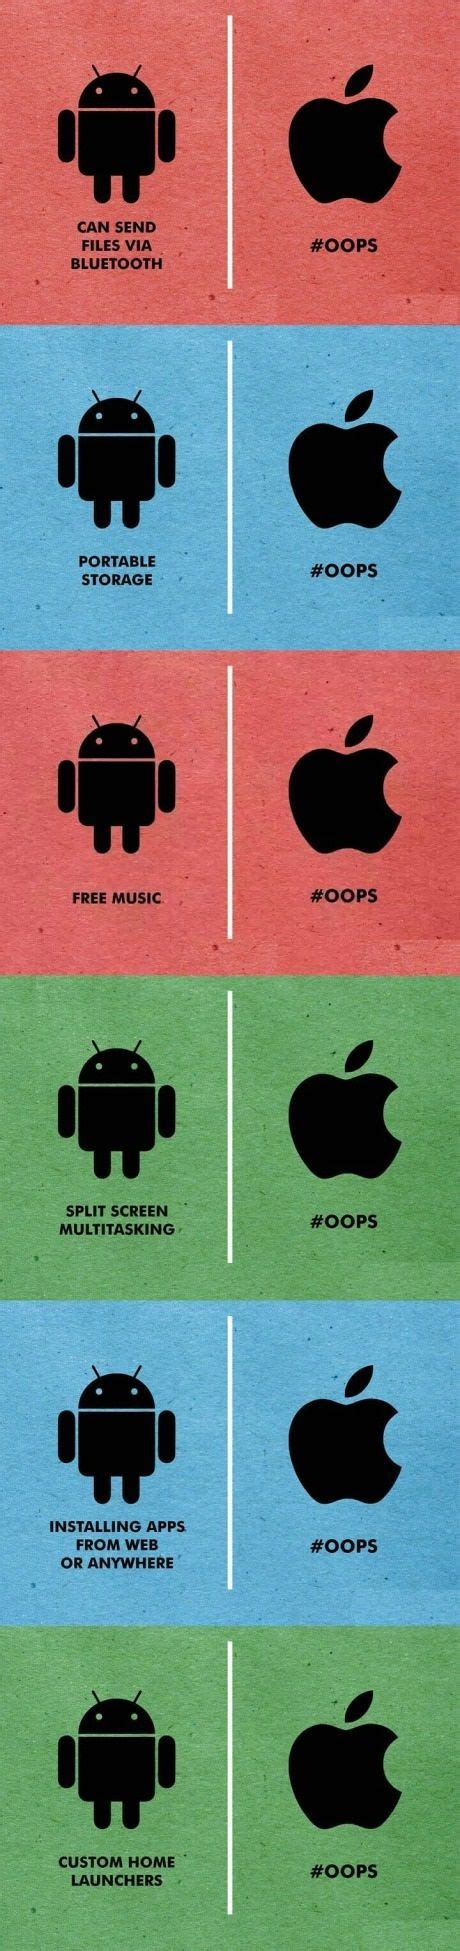 Apple Vs Android Features Iphone Humor Android Vs Iphone Android Meme